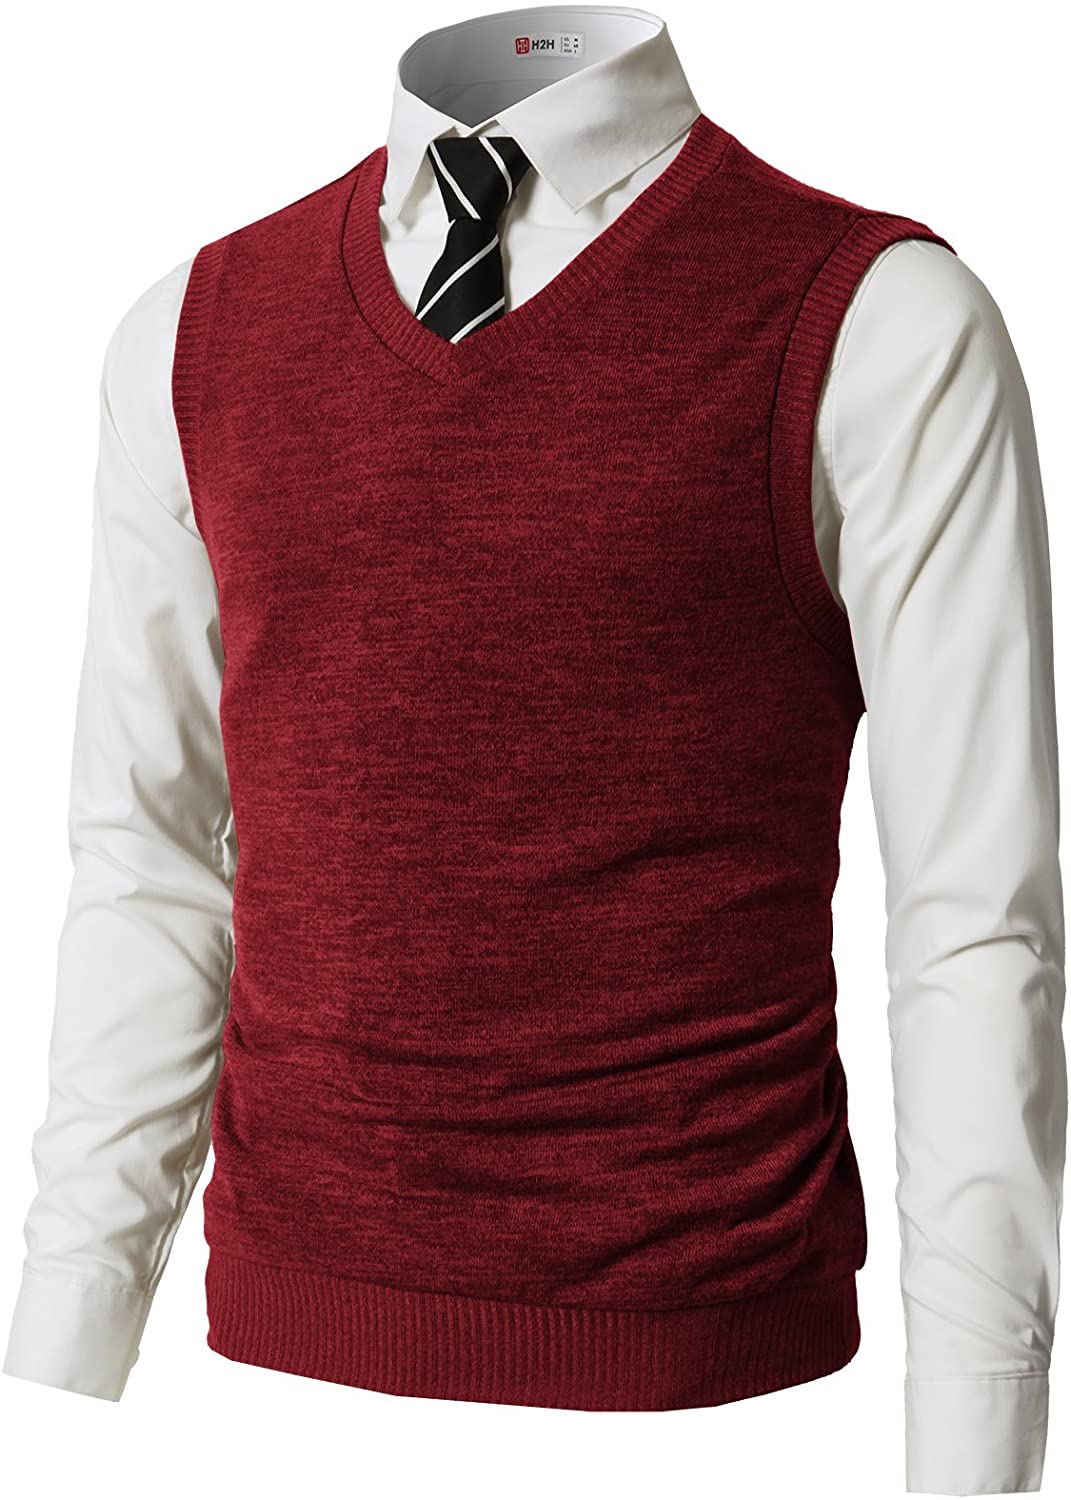 H2H Mens Casual Slim Fit Pullover Sweaters Vest Lightweight Knitted Thermal Basic Designed 